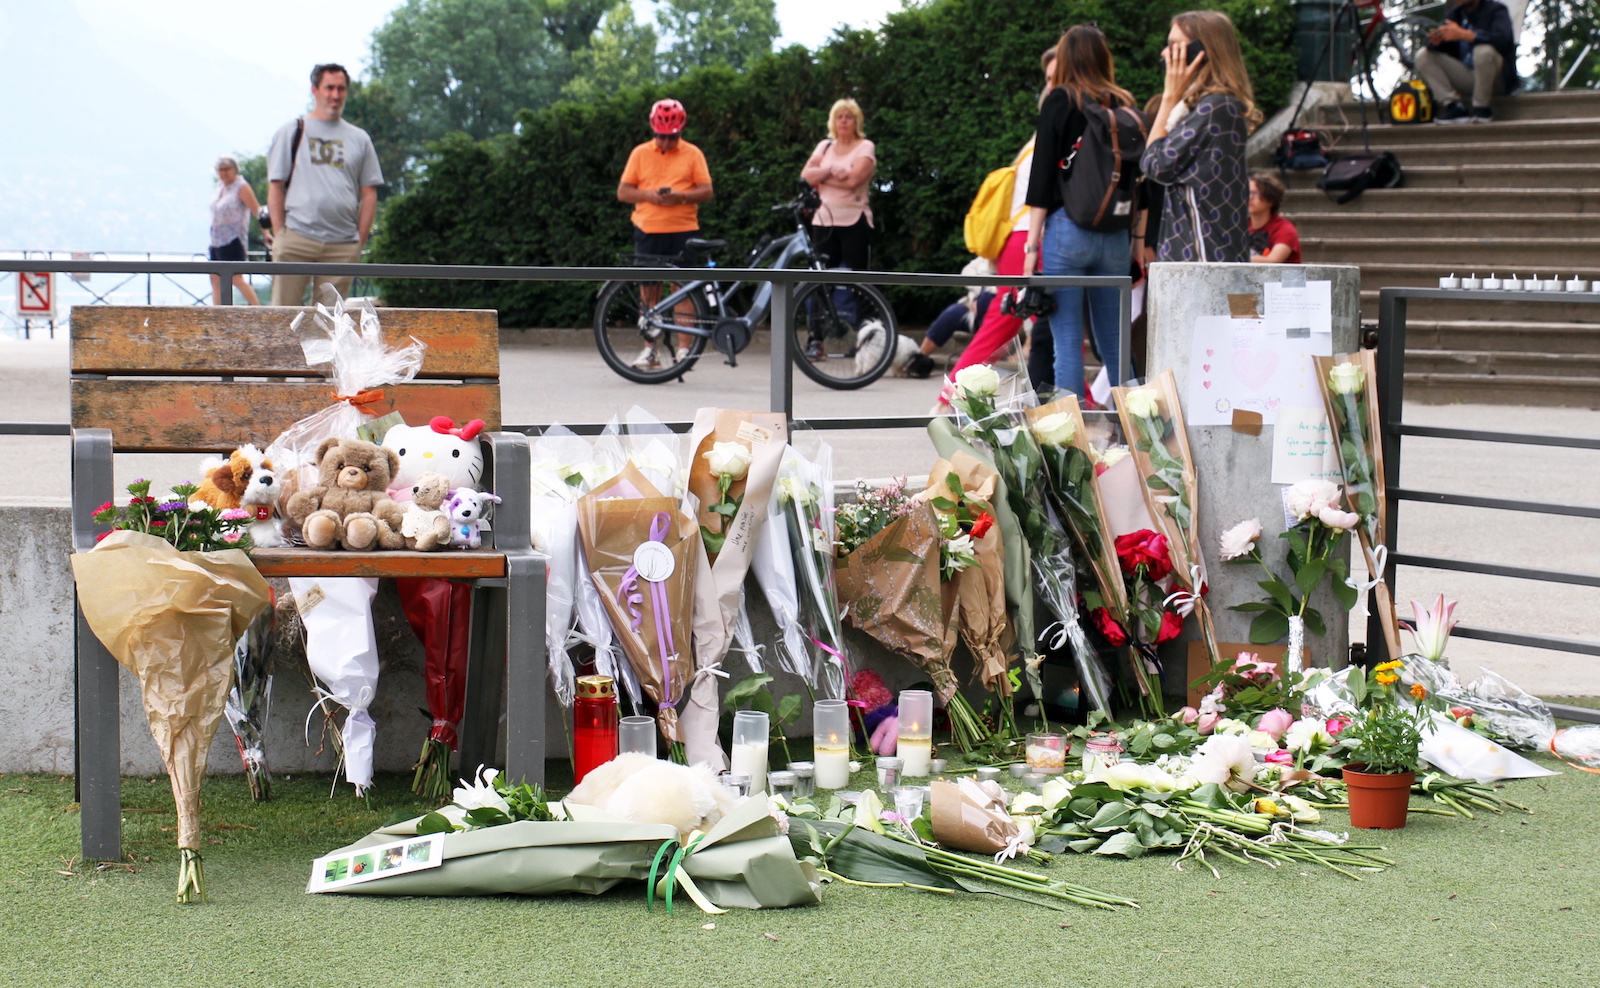 epa10681001 Tributes at the scene of a knife attack in the Paquier d'Annecy park in Annecy, France, 09 June 2023. On 08 June, a man had carried out an attack with a knife injuring at least six people who were taken to hospital, including four children. The perpetrator, a Syrian refugee seeker was arrested and remains in custody, Police said.  EPA/GREGORY ROS